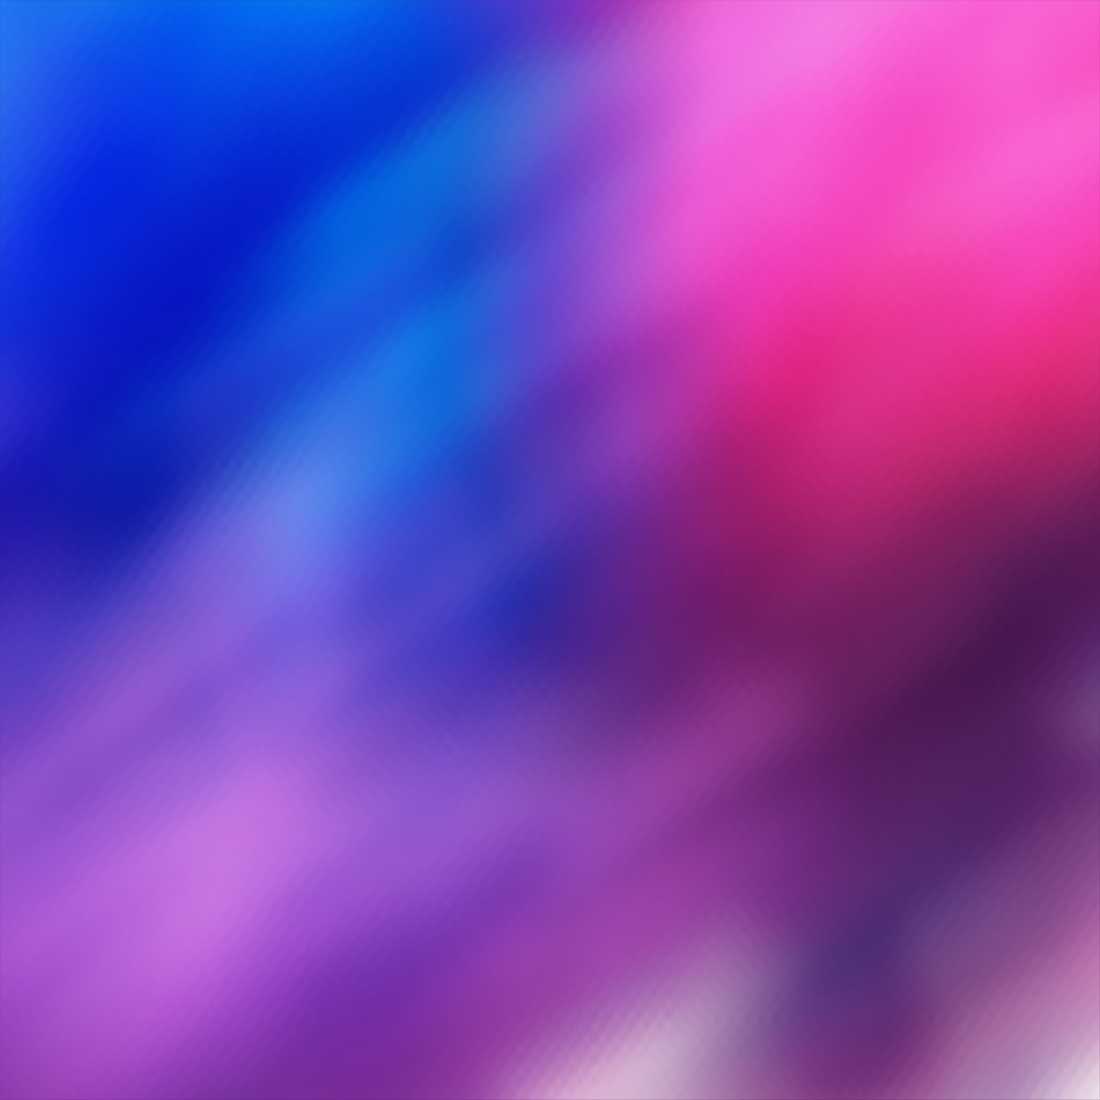 Abstract Gradient Background Luxury Vivid Blurred Colorful Texture Wallpaper Photo second cover image.